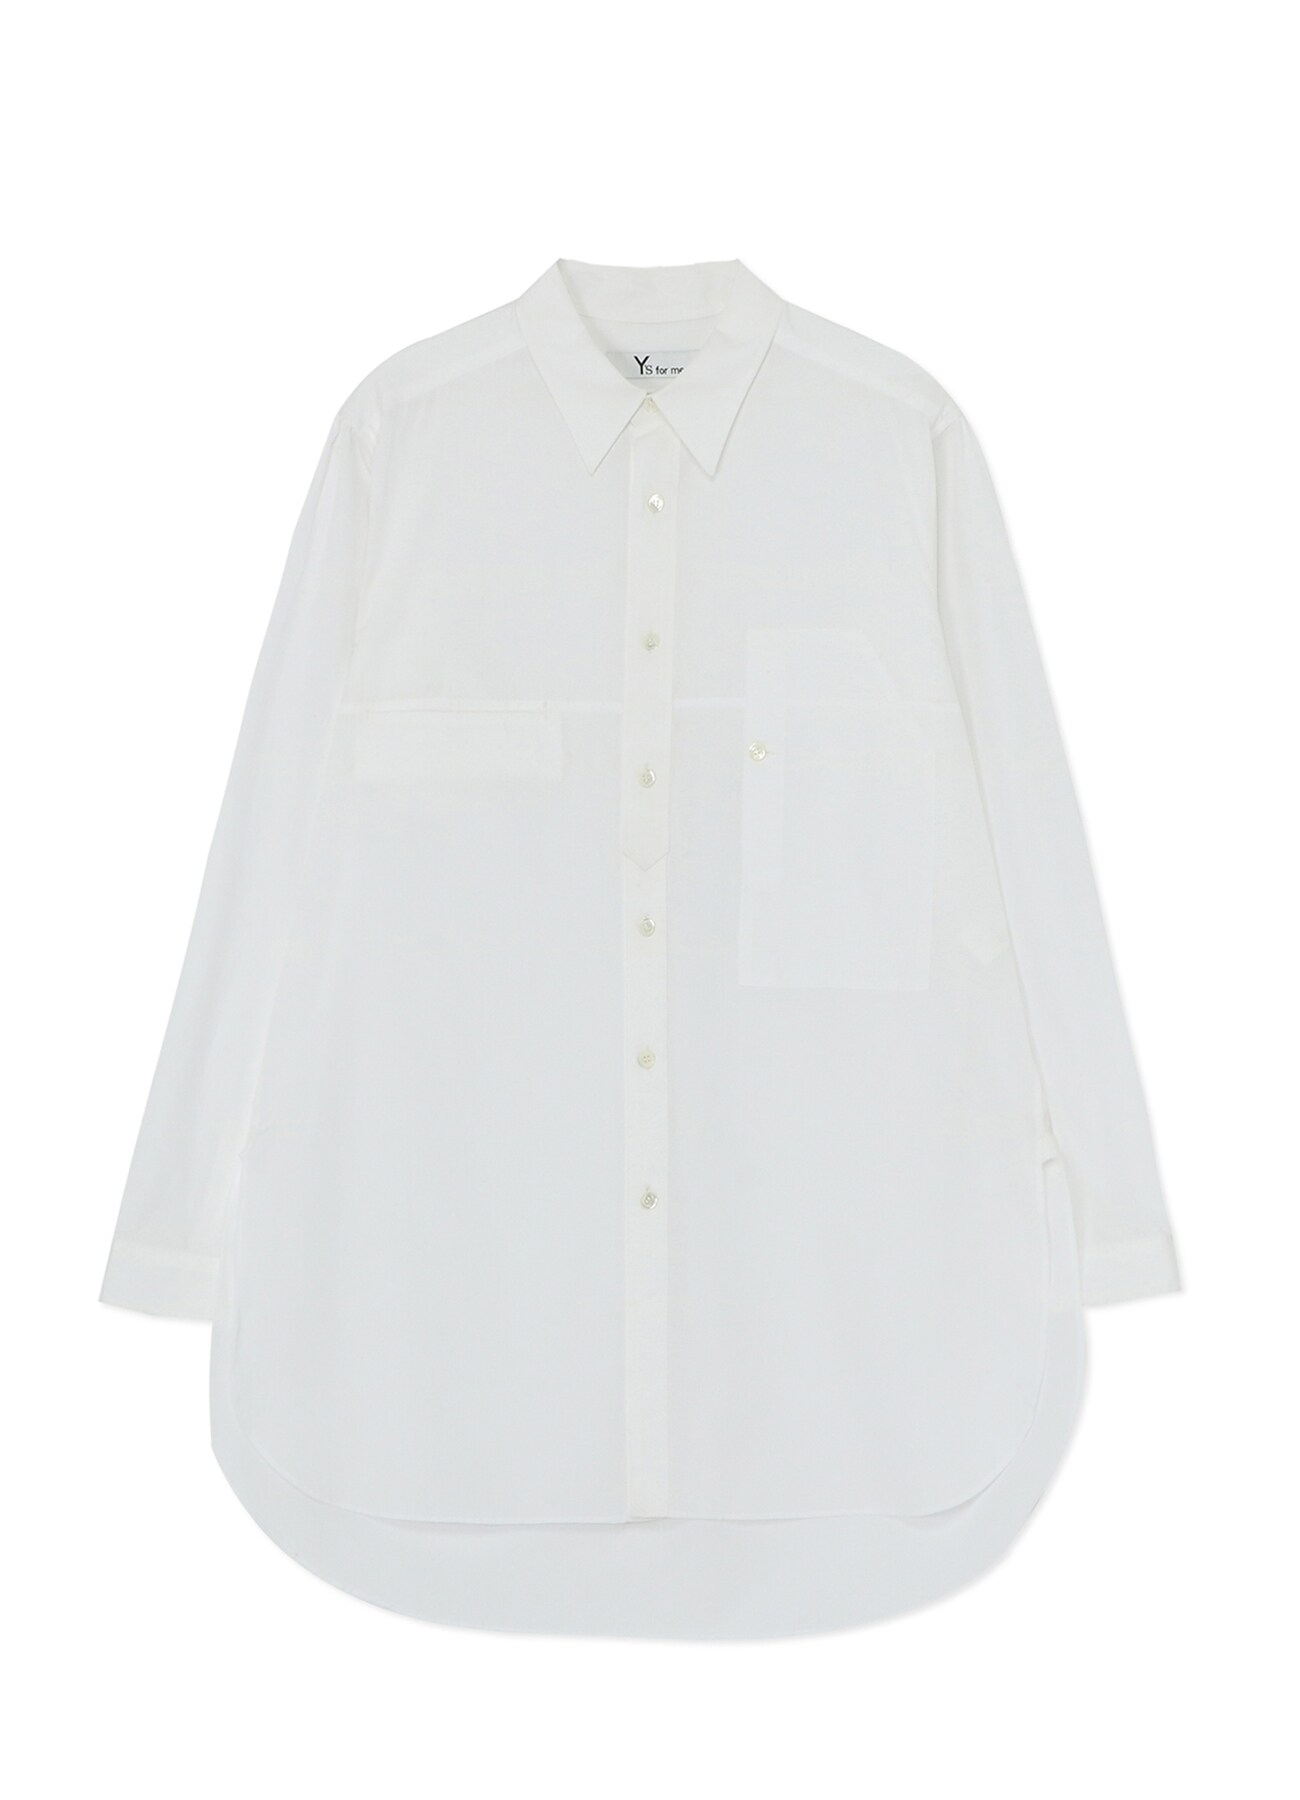 COTTON BROADCLOTH SHIRT WITH CHEST POCKET AND ROUNDED HEM